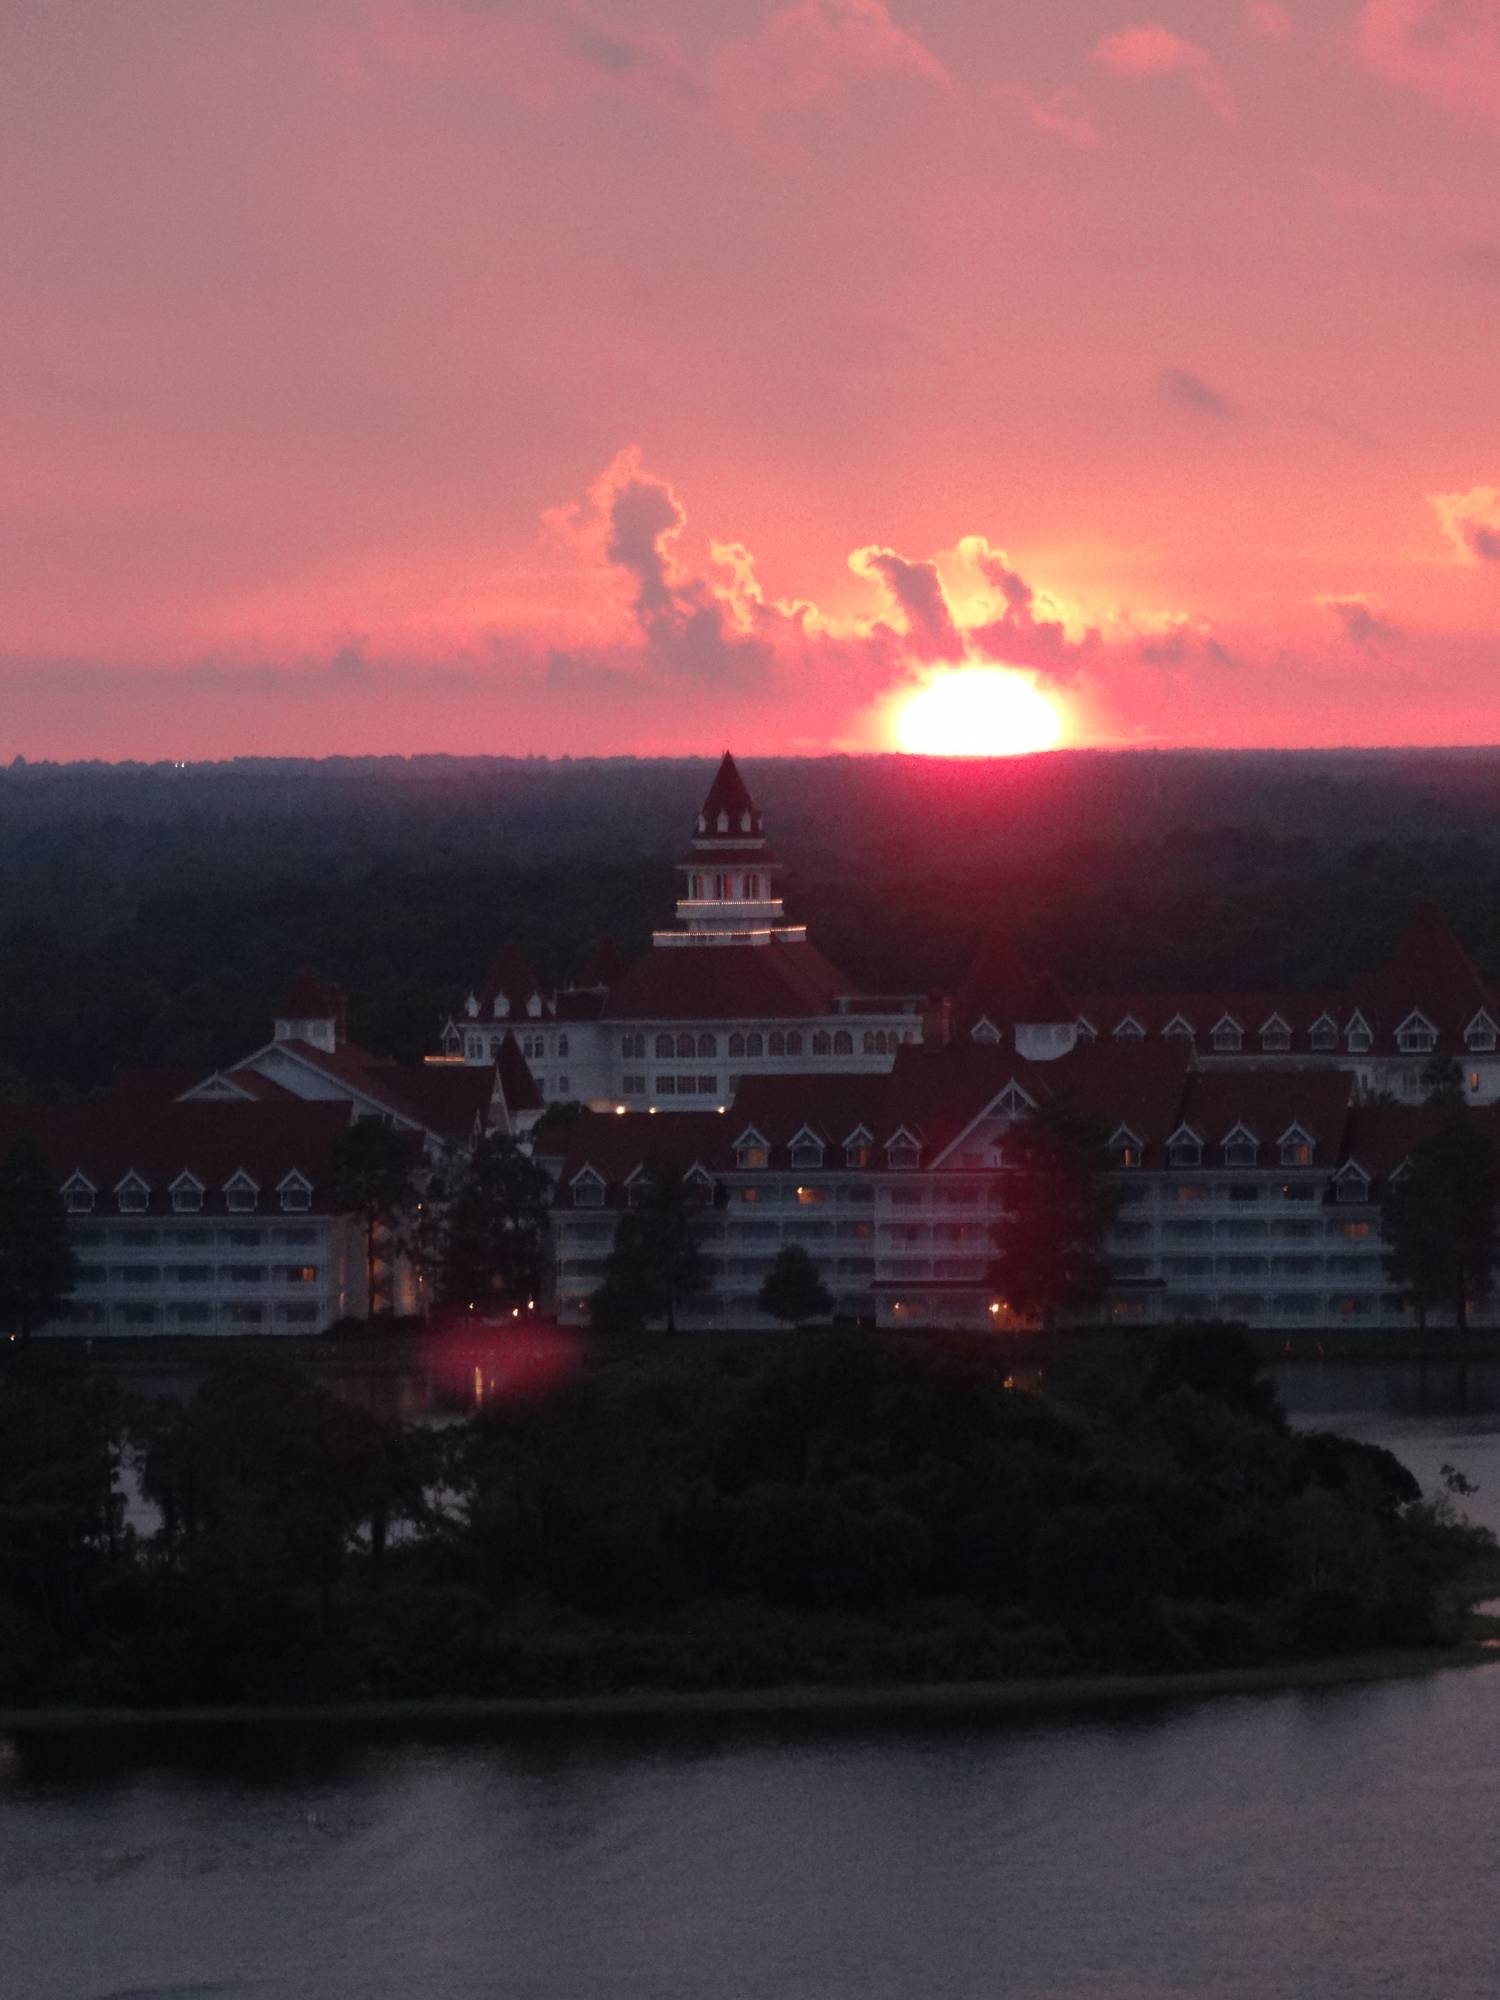 Grand Floridian at sunset - from the Contemporary